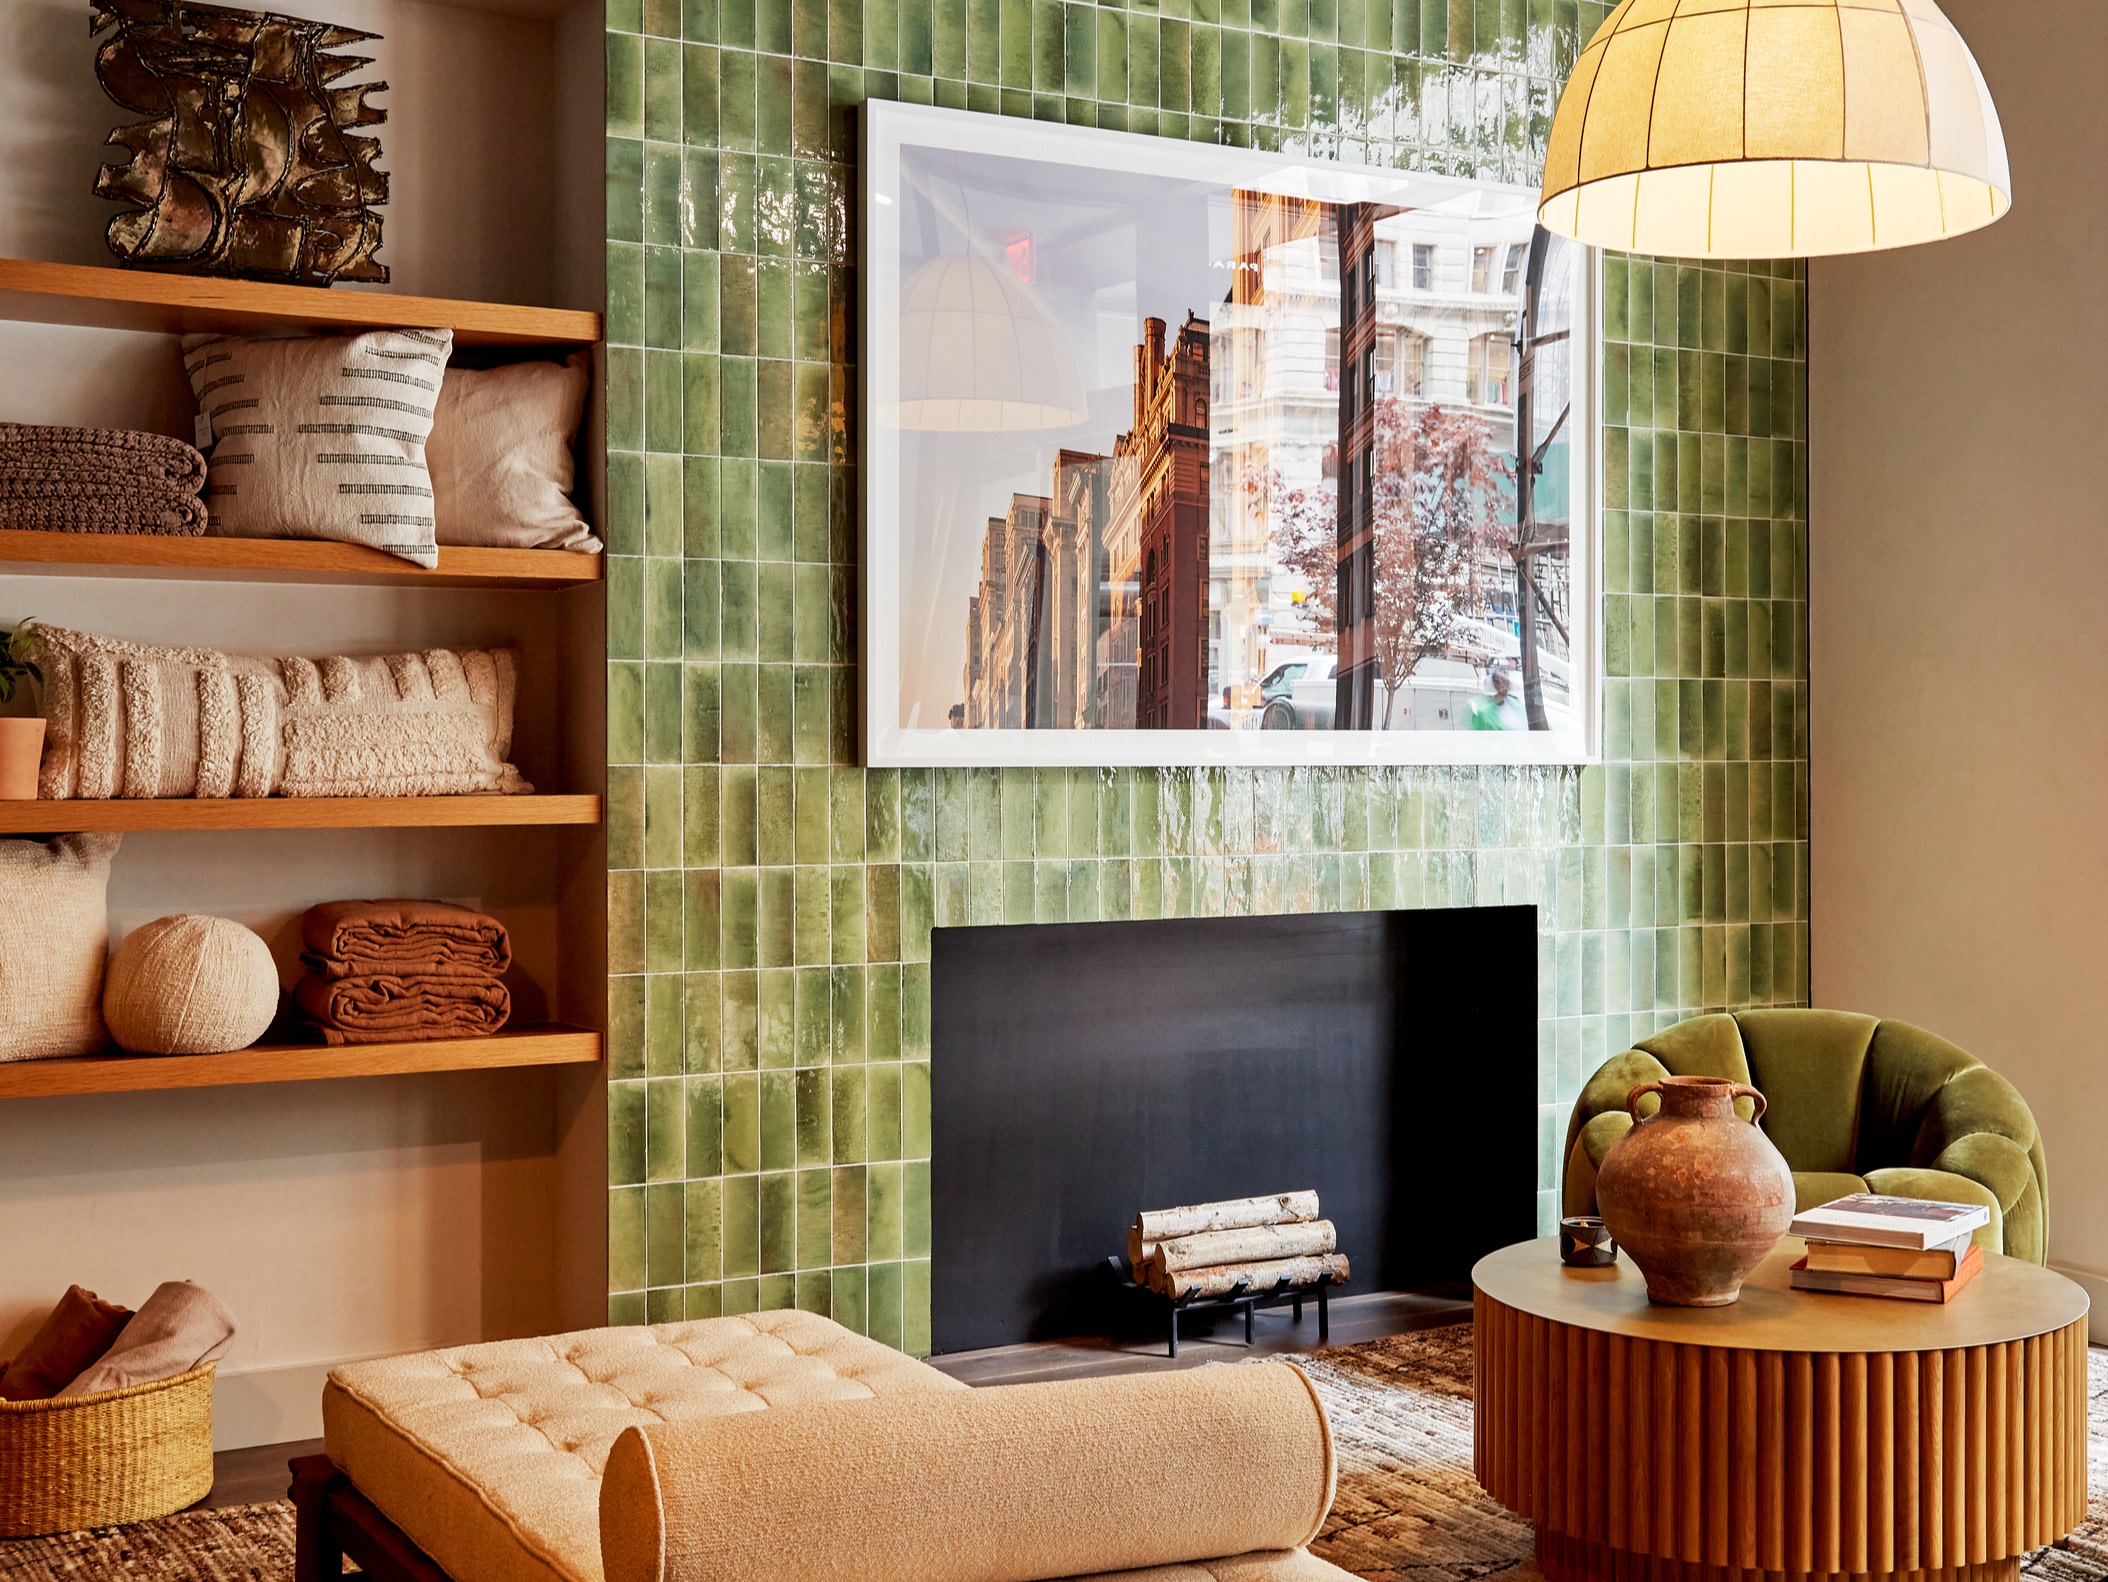 A green-tiled fireplace in a cozy sitting room